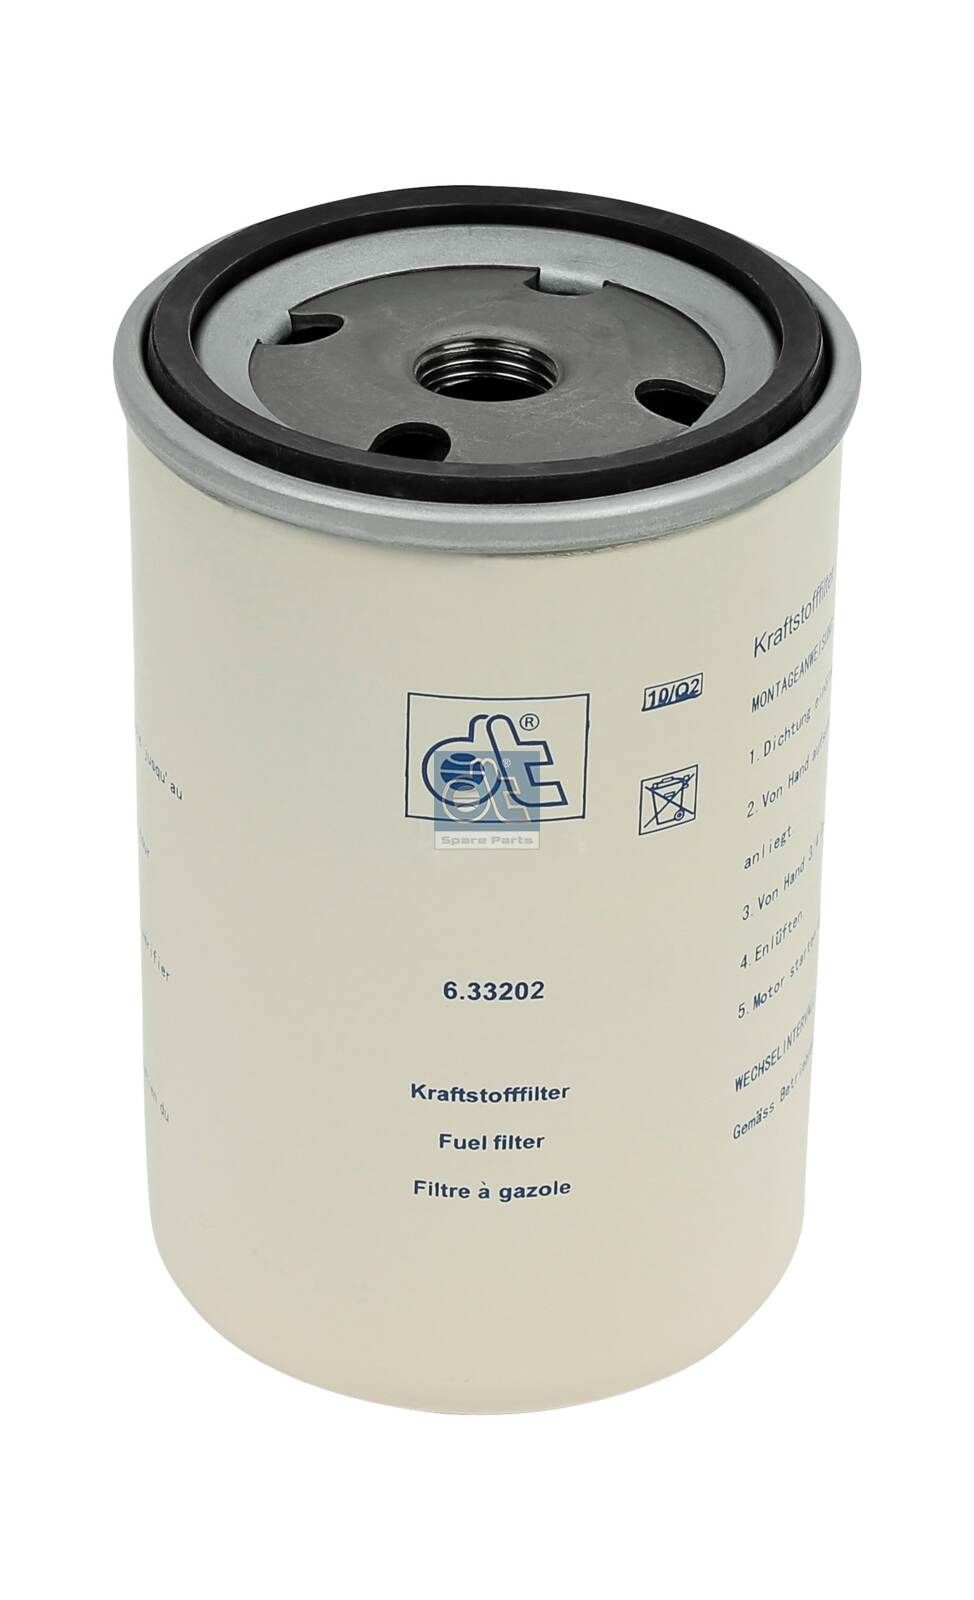 WK 727 DT Spare Parts 6.33202 Fuel filter 7701017732